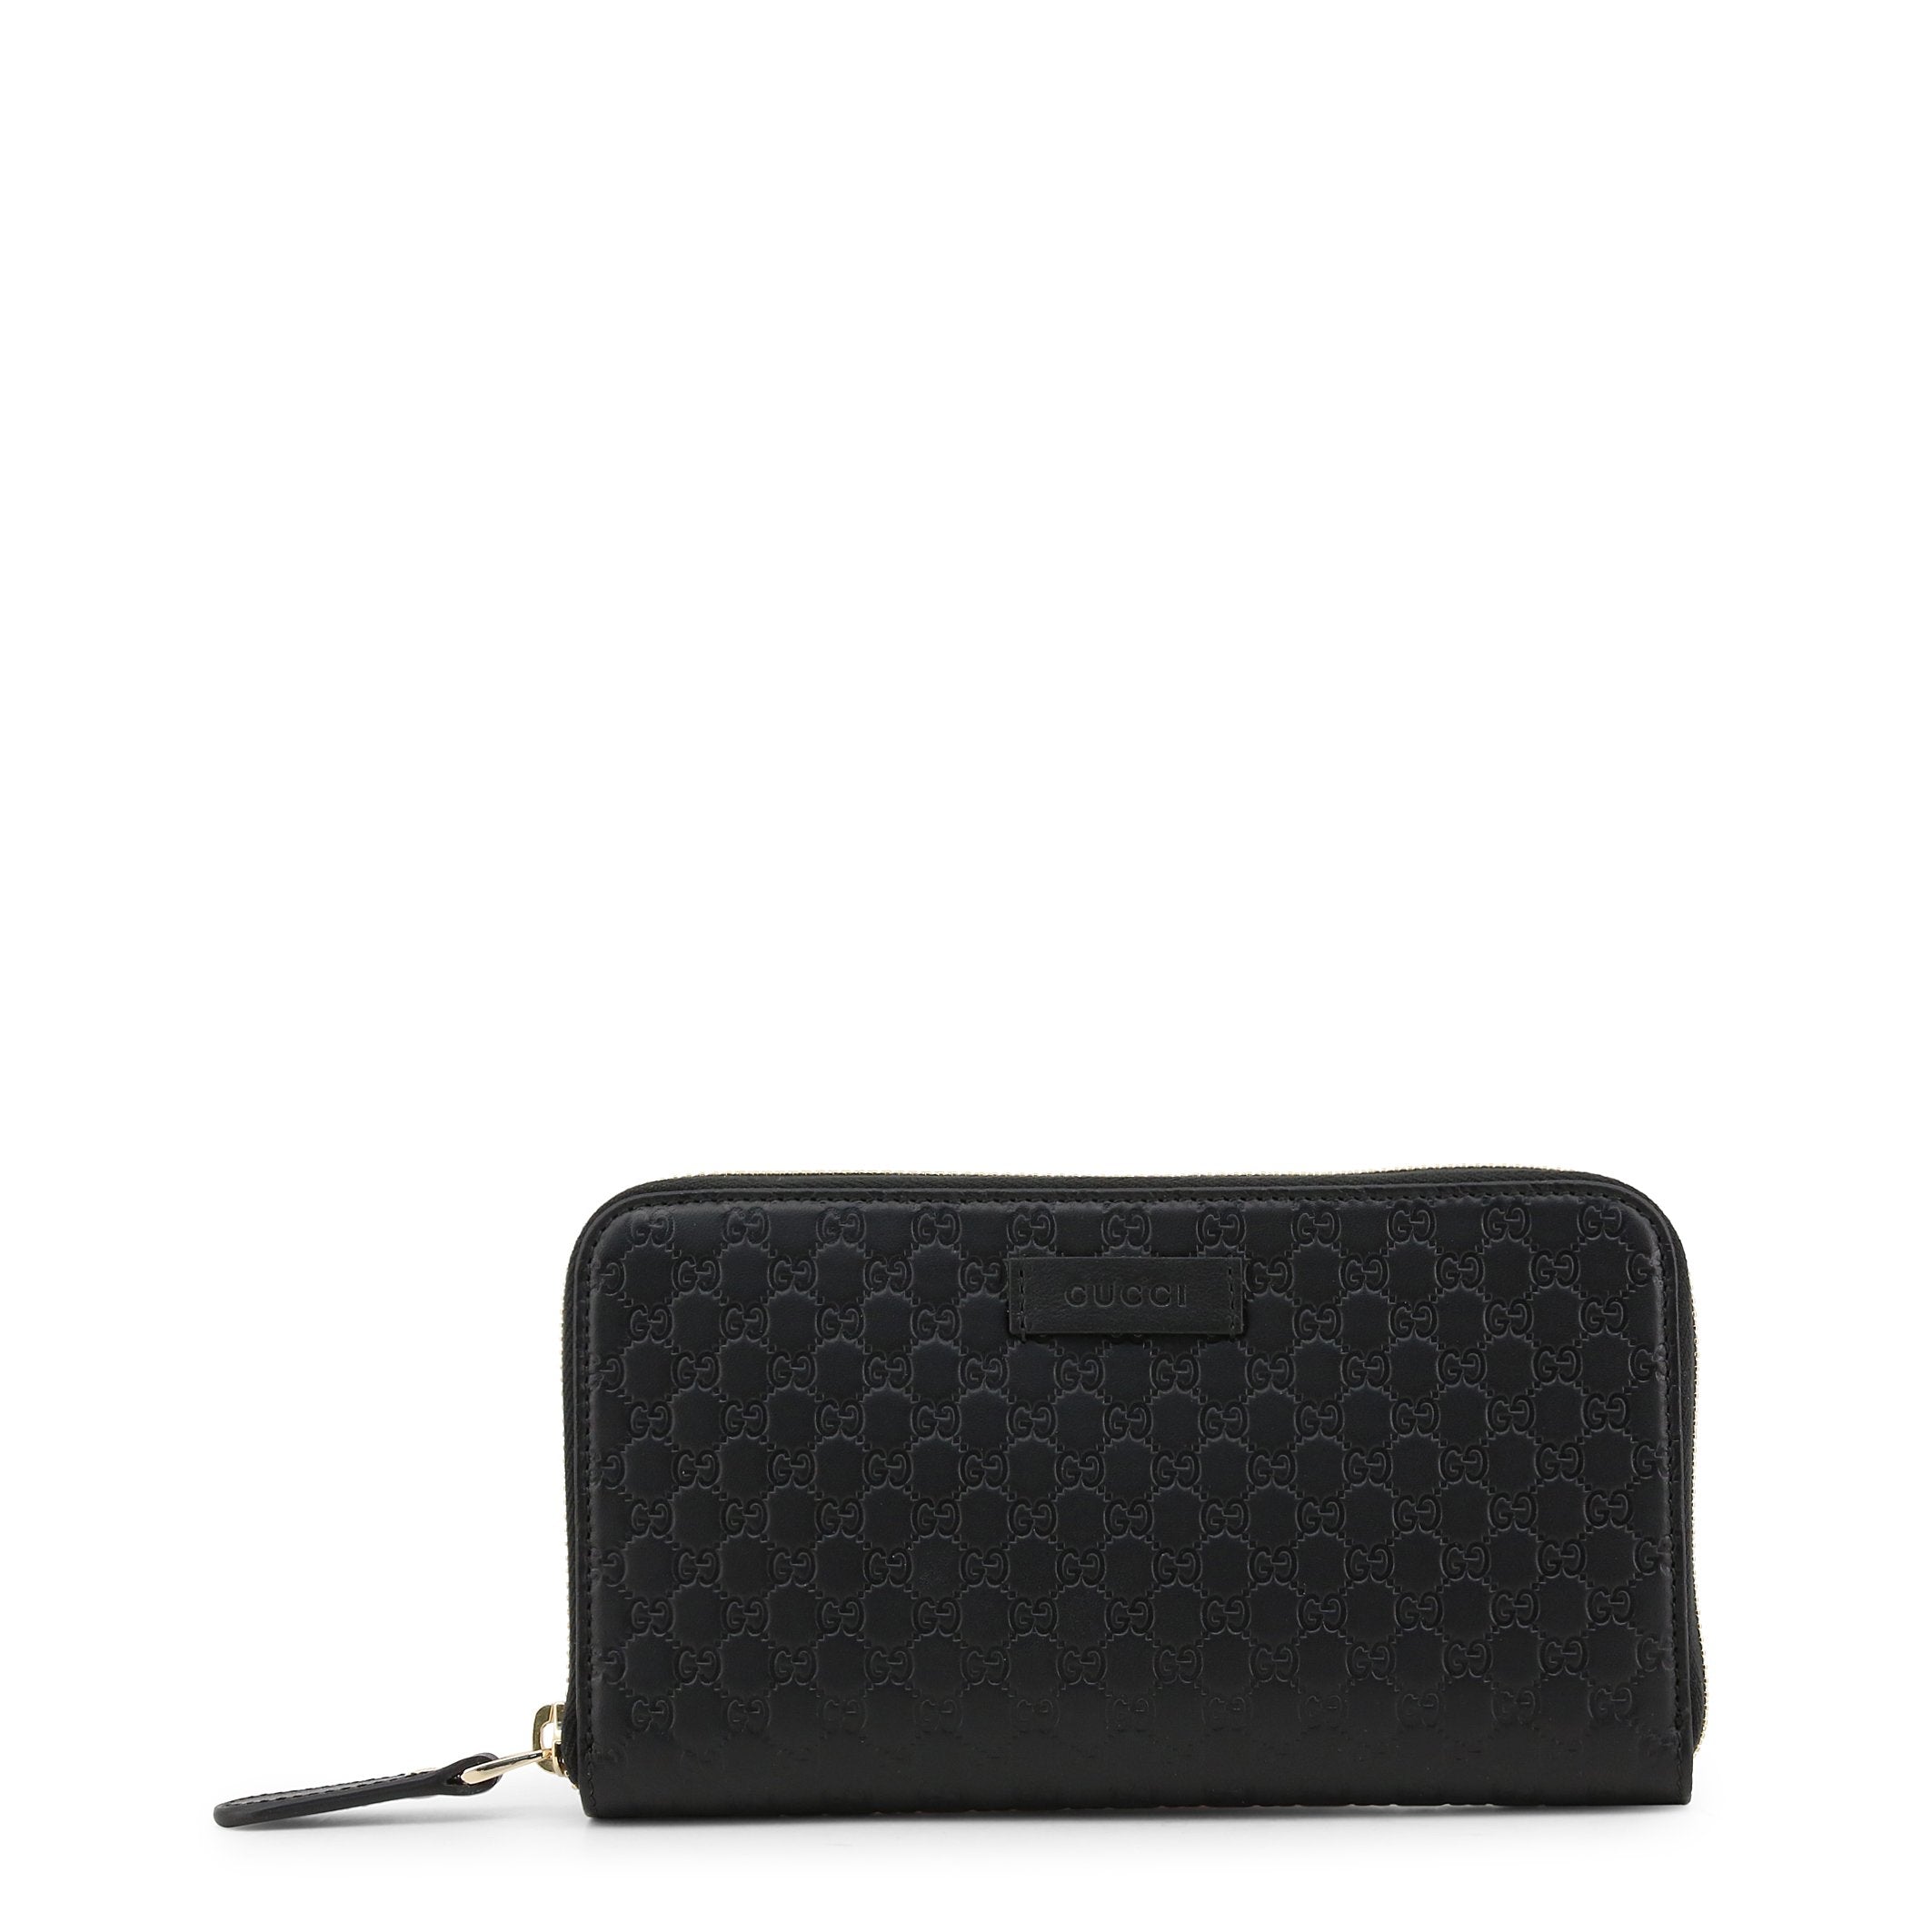 Buy & Consign Authentic Gucci Microguccissima Zip Around Wallet Black at The Plush Posh